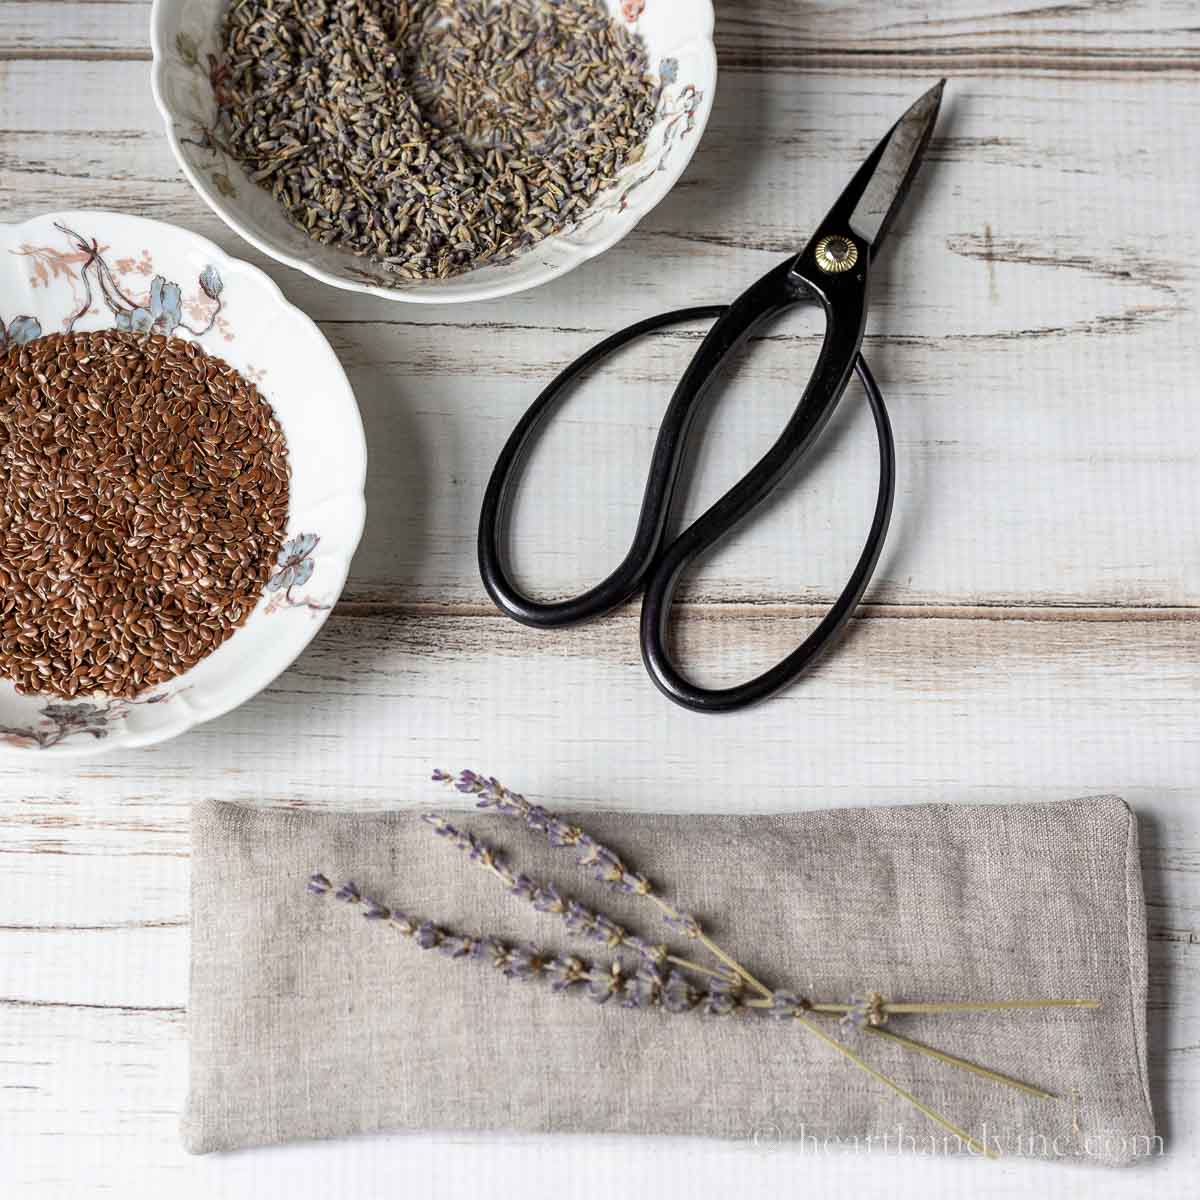 Linen eye pillow with dried lavender and bowls of flaxseed and lavender buds next to a pair of scissors.